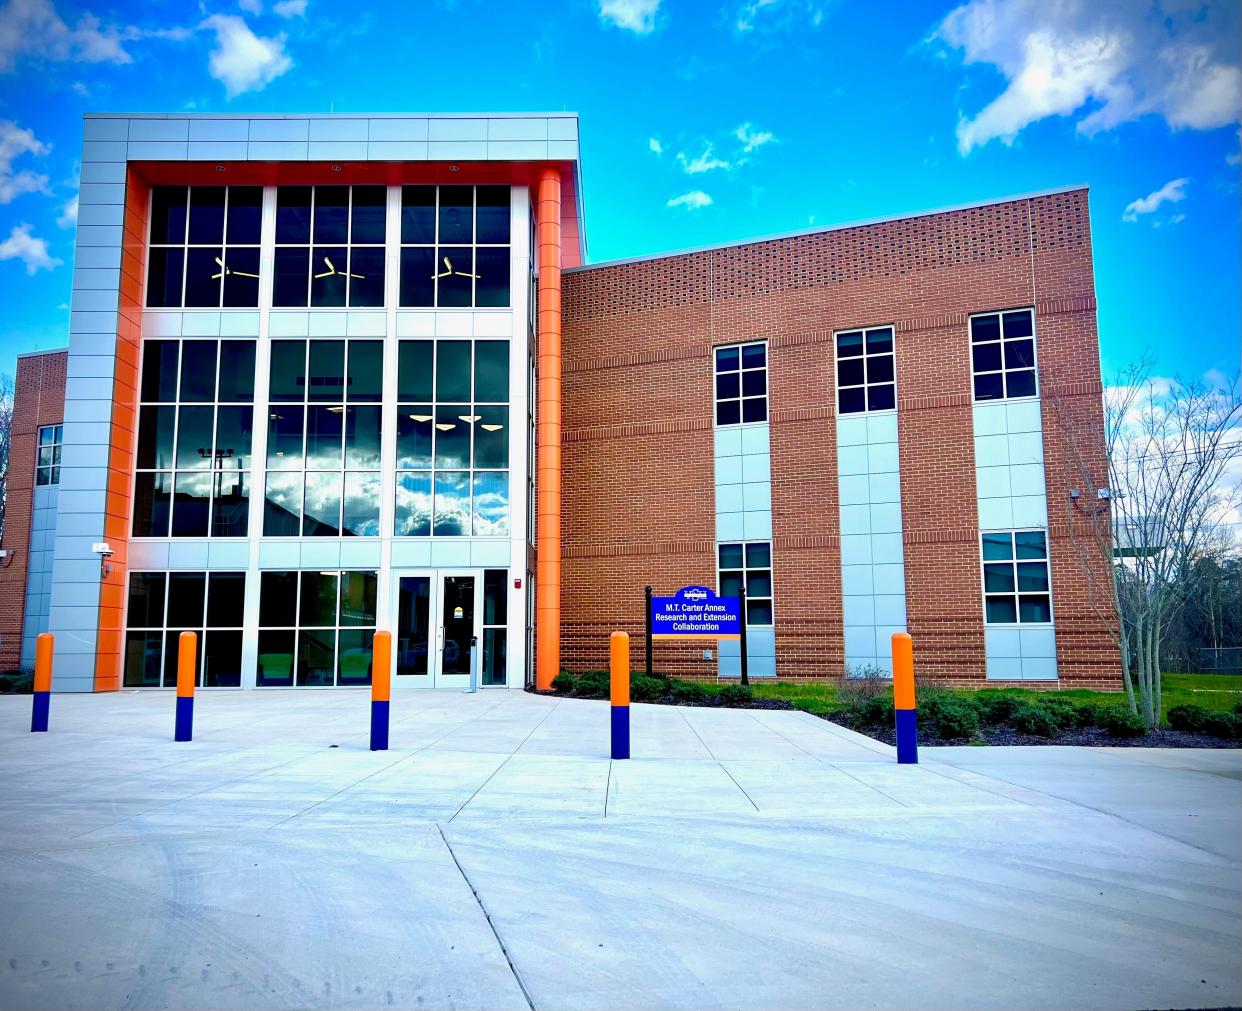 Virginia State University's Multipurpose Center, where the October 1 presidential debate will be held. The second debate of the presidential election will be the first to be held on an HBCU campus.